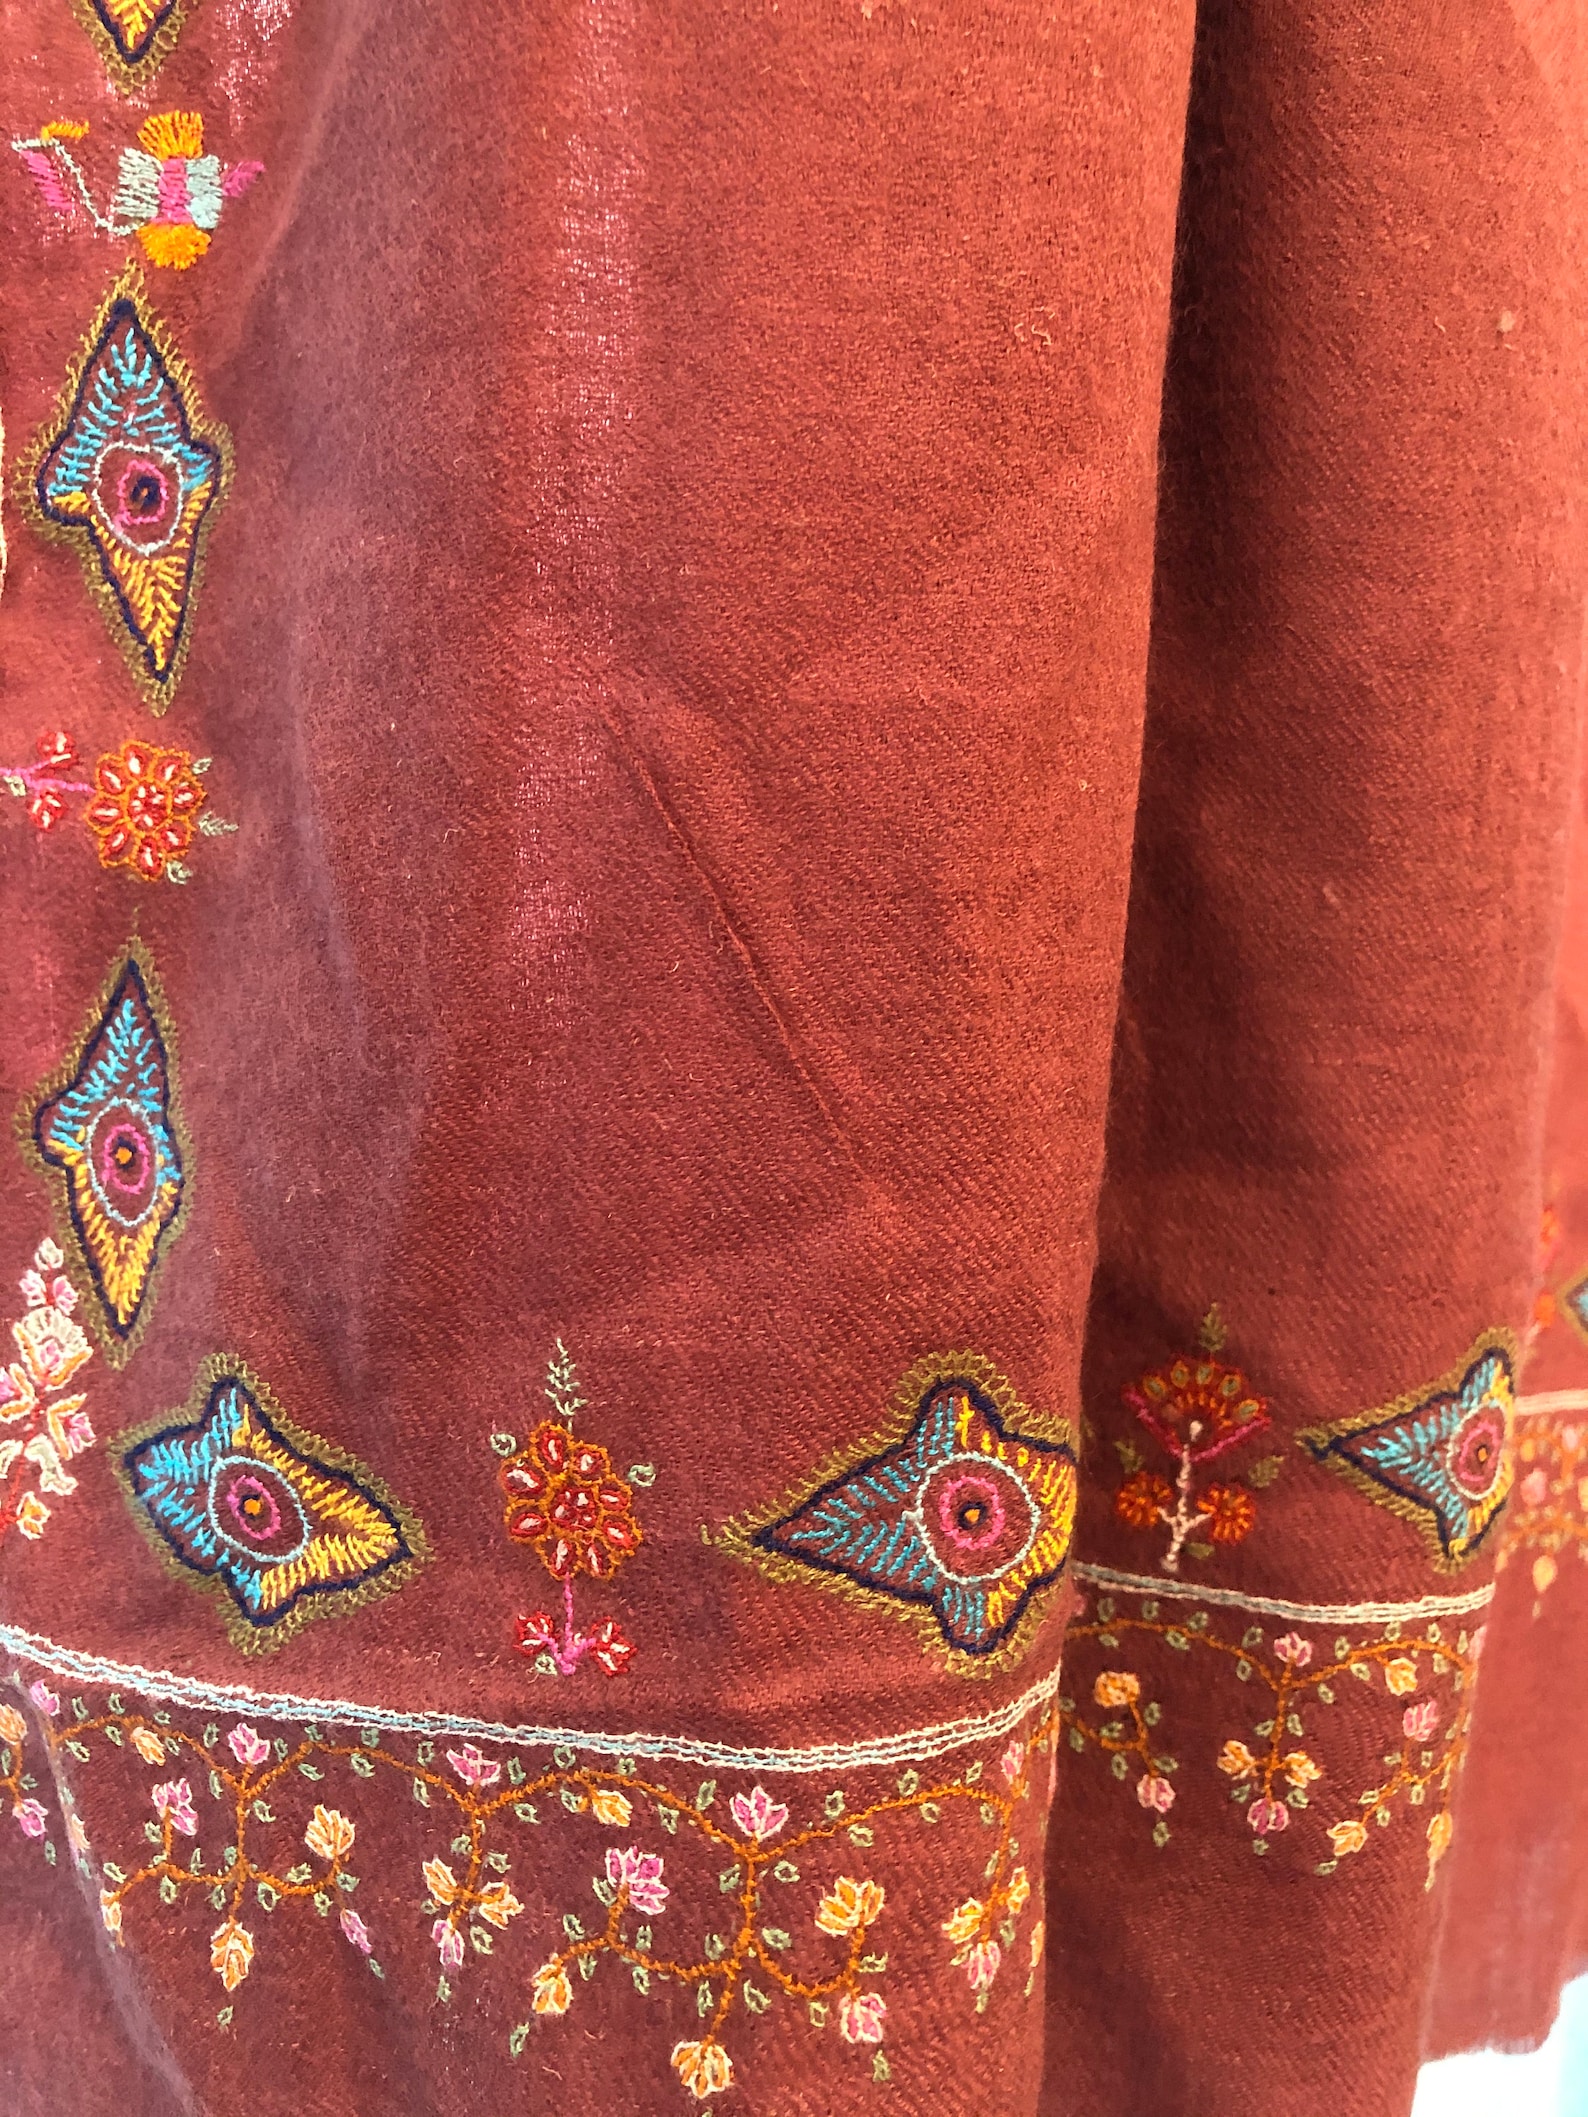 Indian Red Embroidery Scarf/Handwoven Scarf/Bridesmaid | Etsy